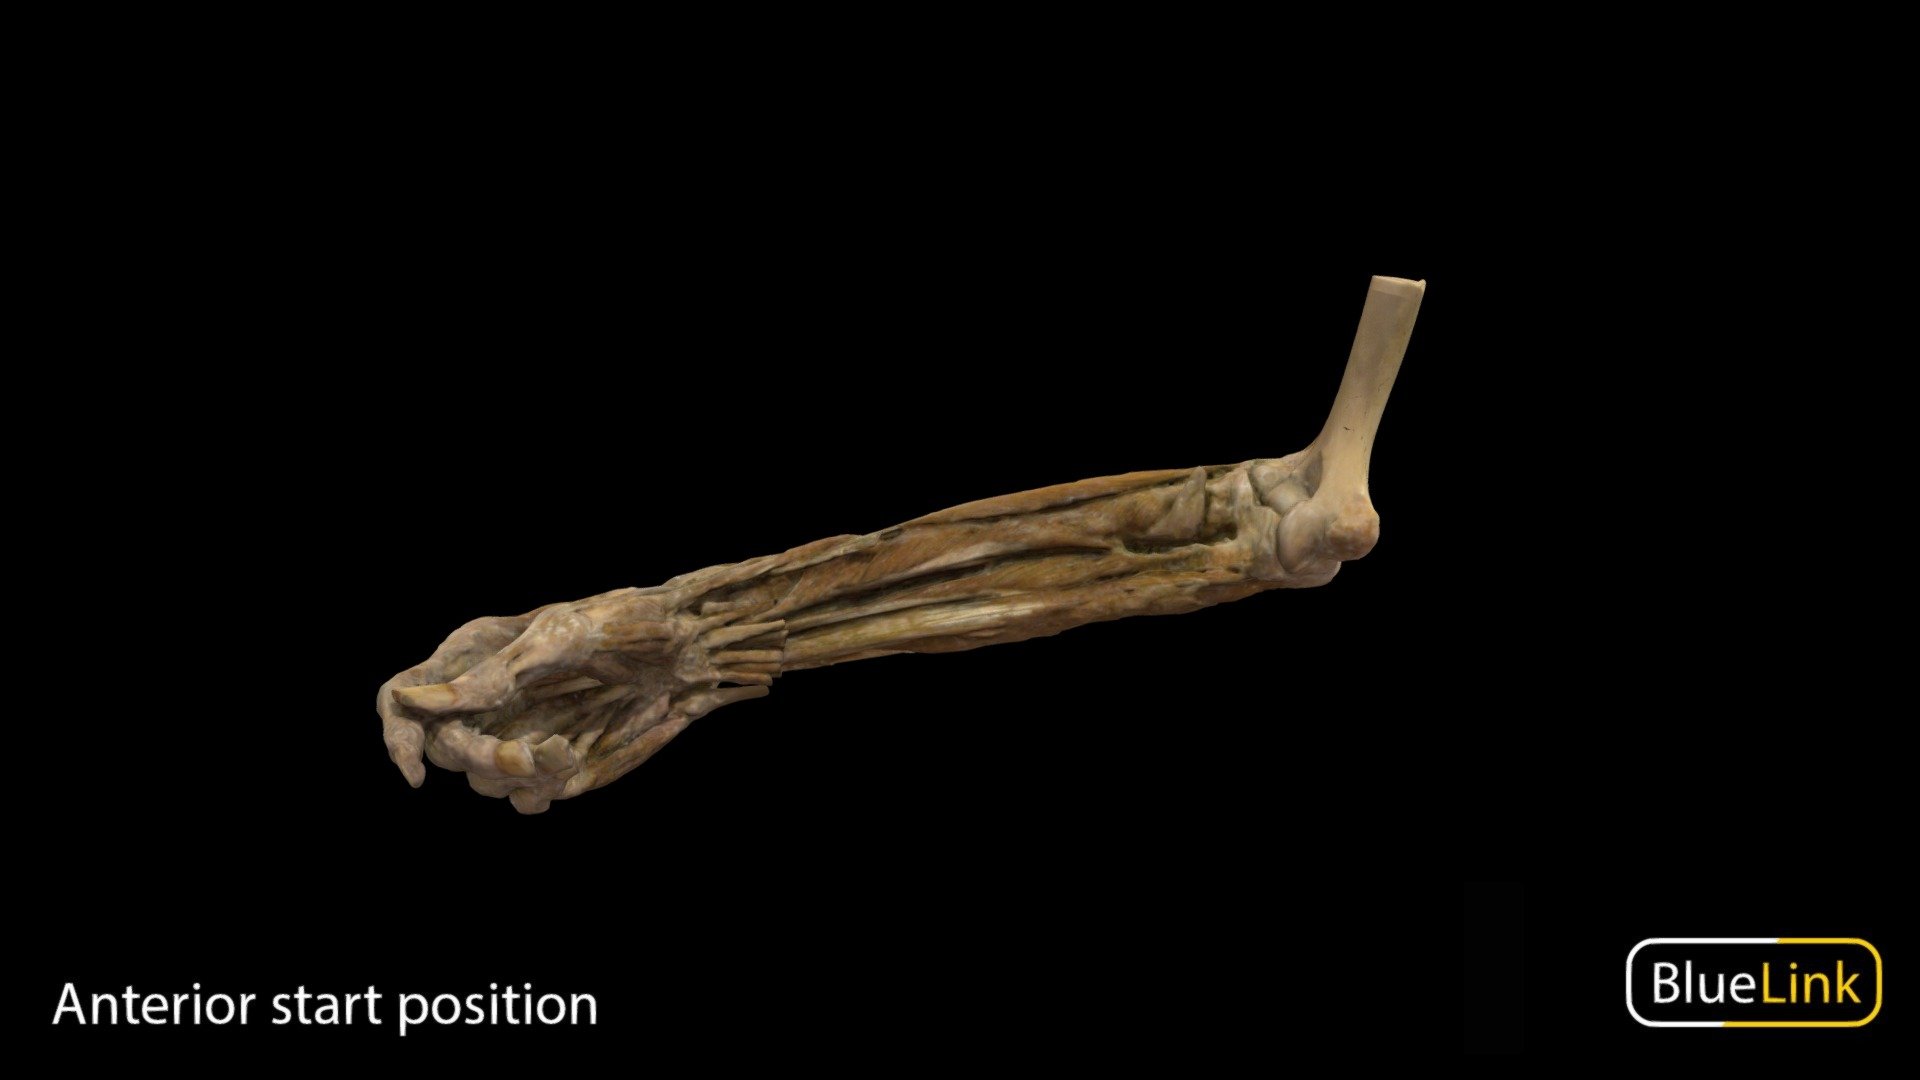 3D scan of the middle compartment of the right arm

Captured with Einscan Pro

Captured and edited by: Will Gribbin

Copyright2019 BK Alsup &amp; GM Fox

ID 29158-U06 - Right Arm Middle Compartment - 3D model by Bluelink Anatomy - University of Michigan (@bluelinkanatomy) 3d model